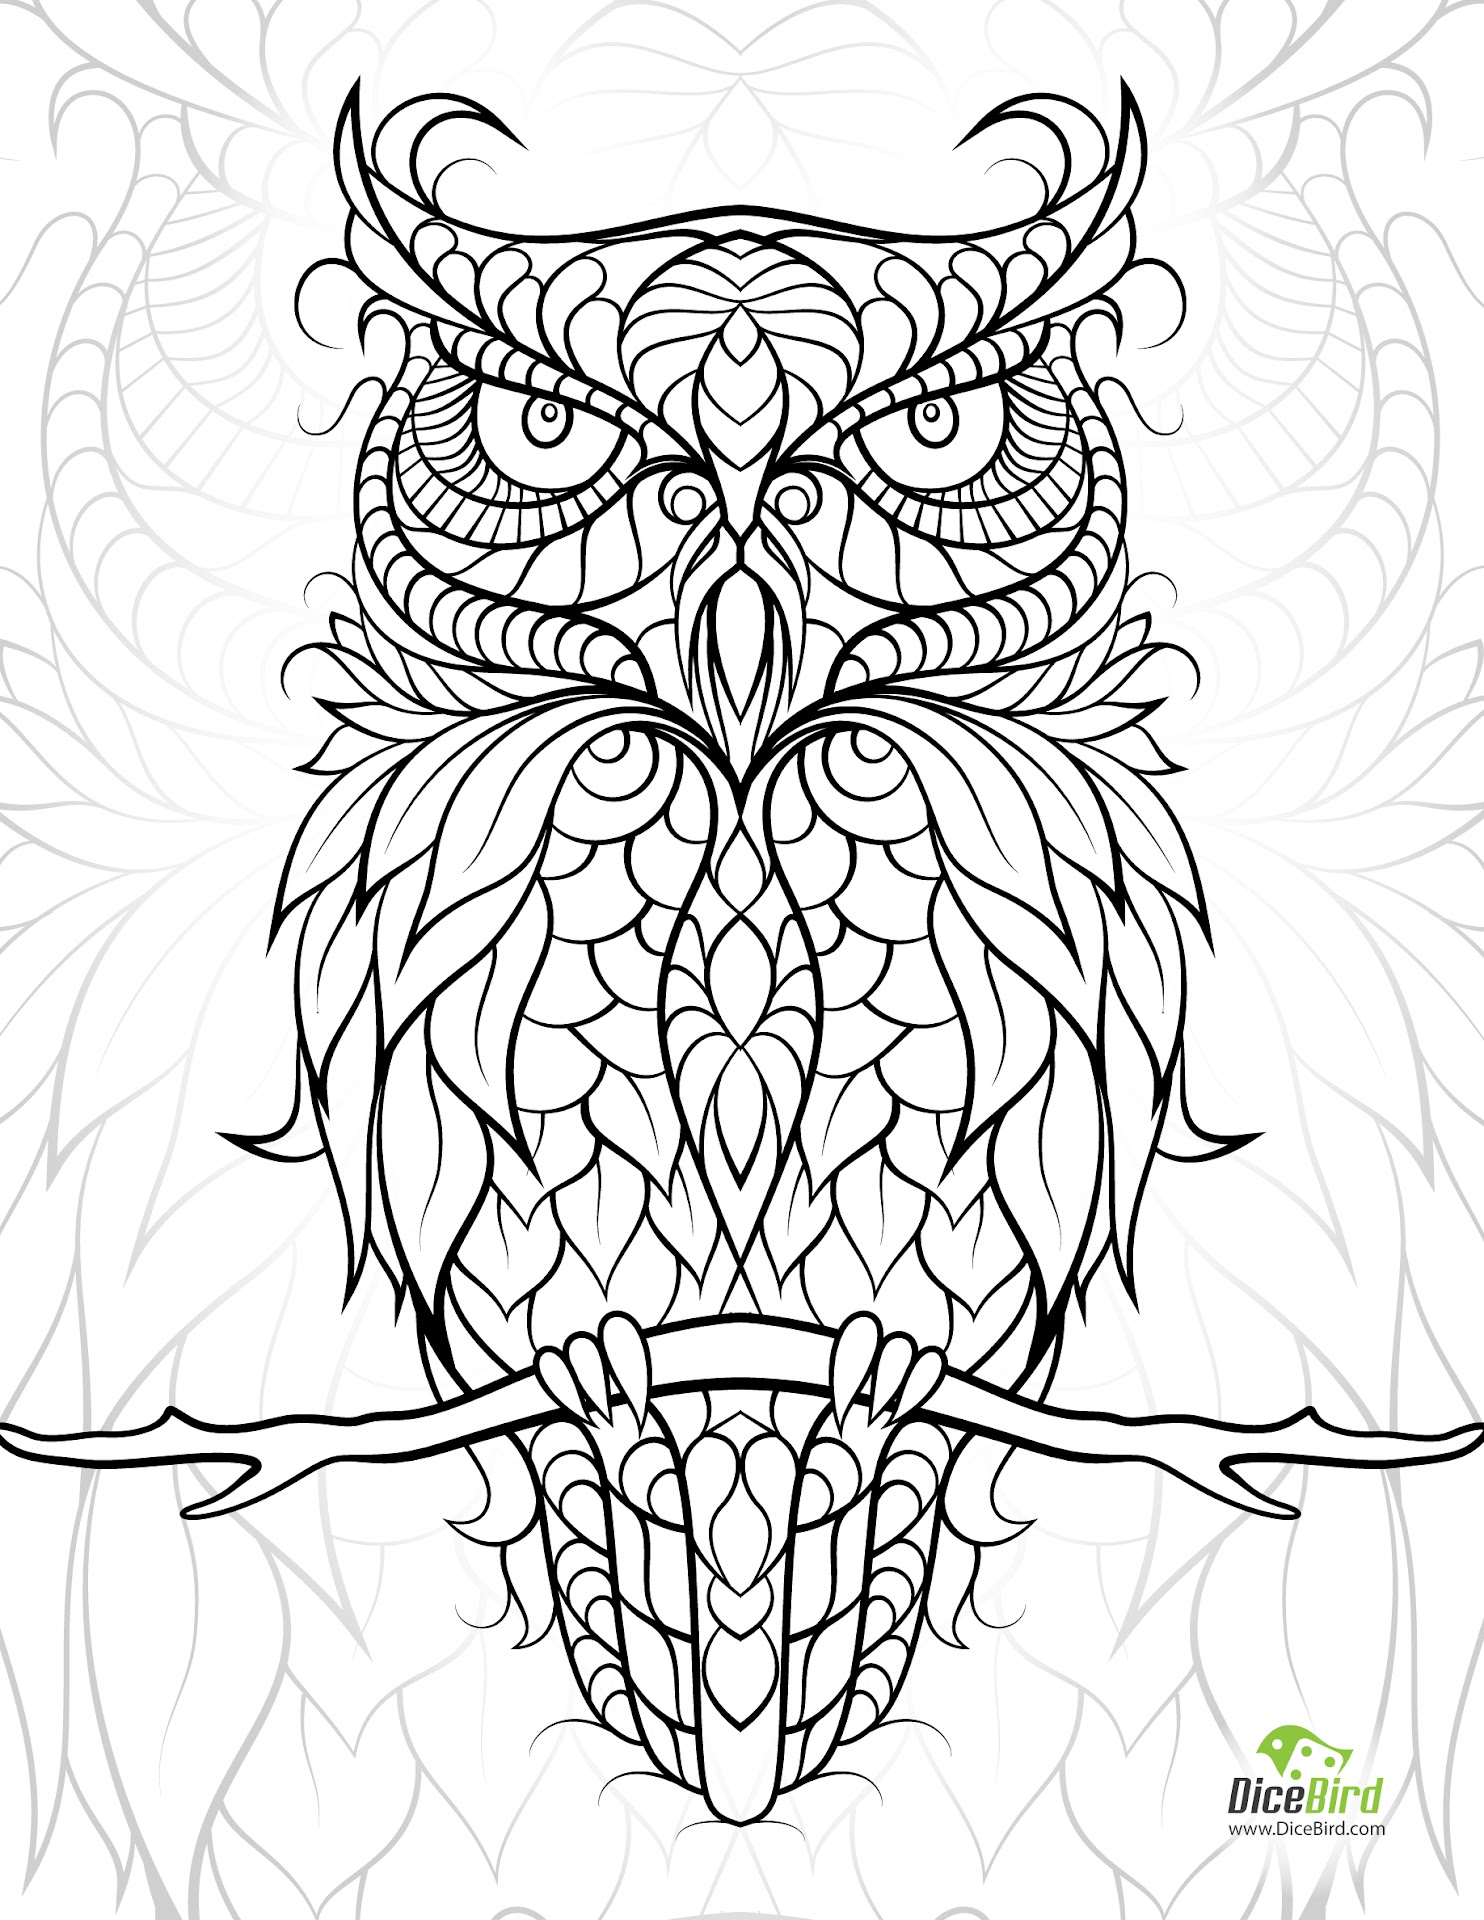 Download Best HD Fancy Owl Coloring Pages Hard Free - Free Coloring Book Images